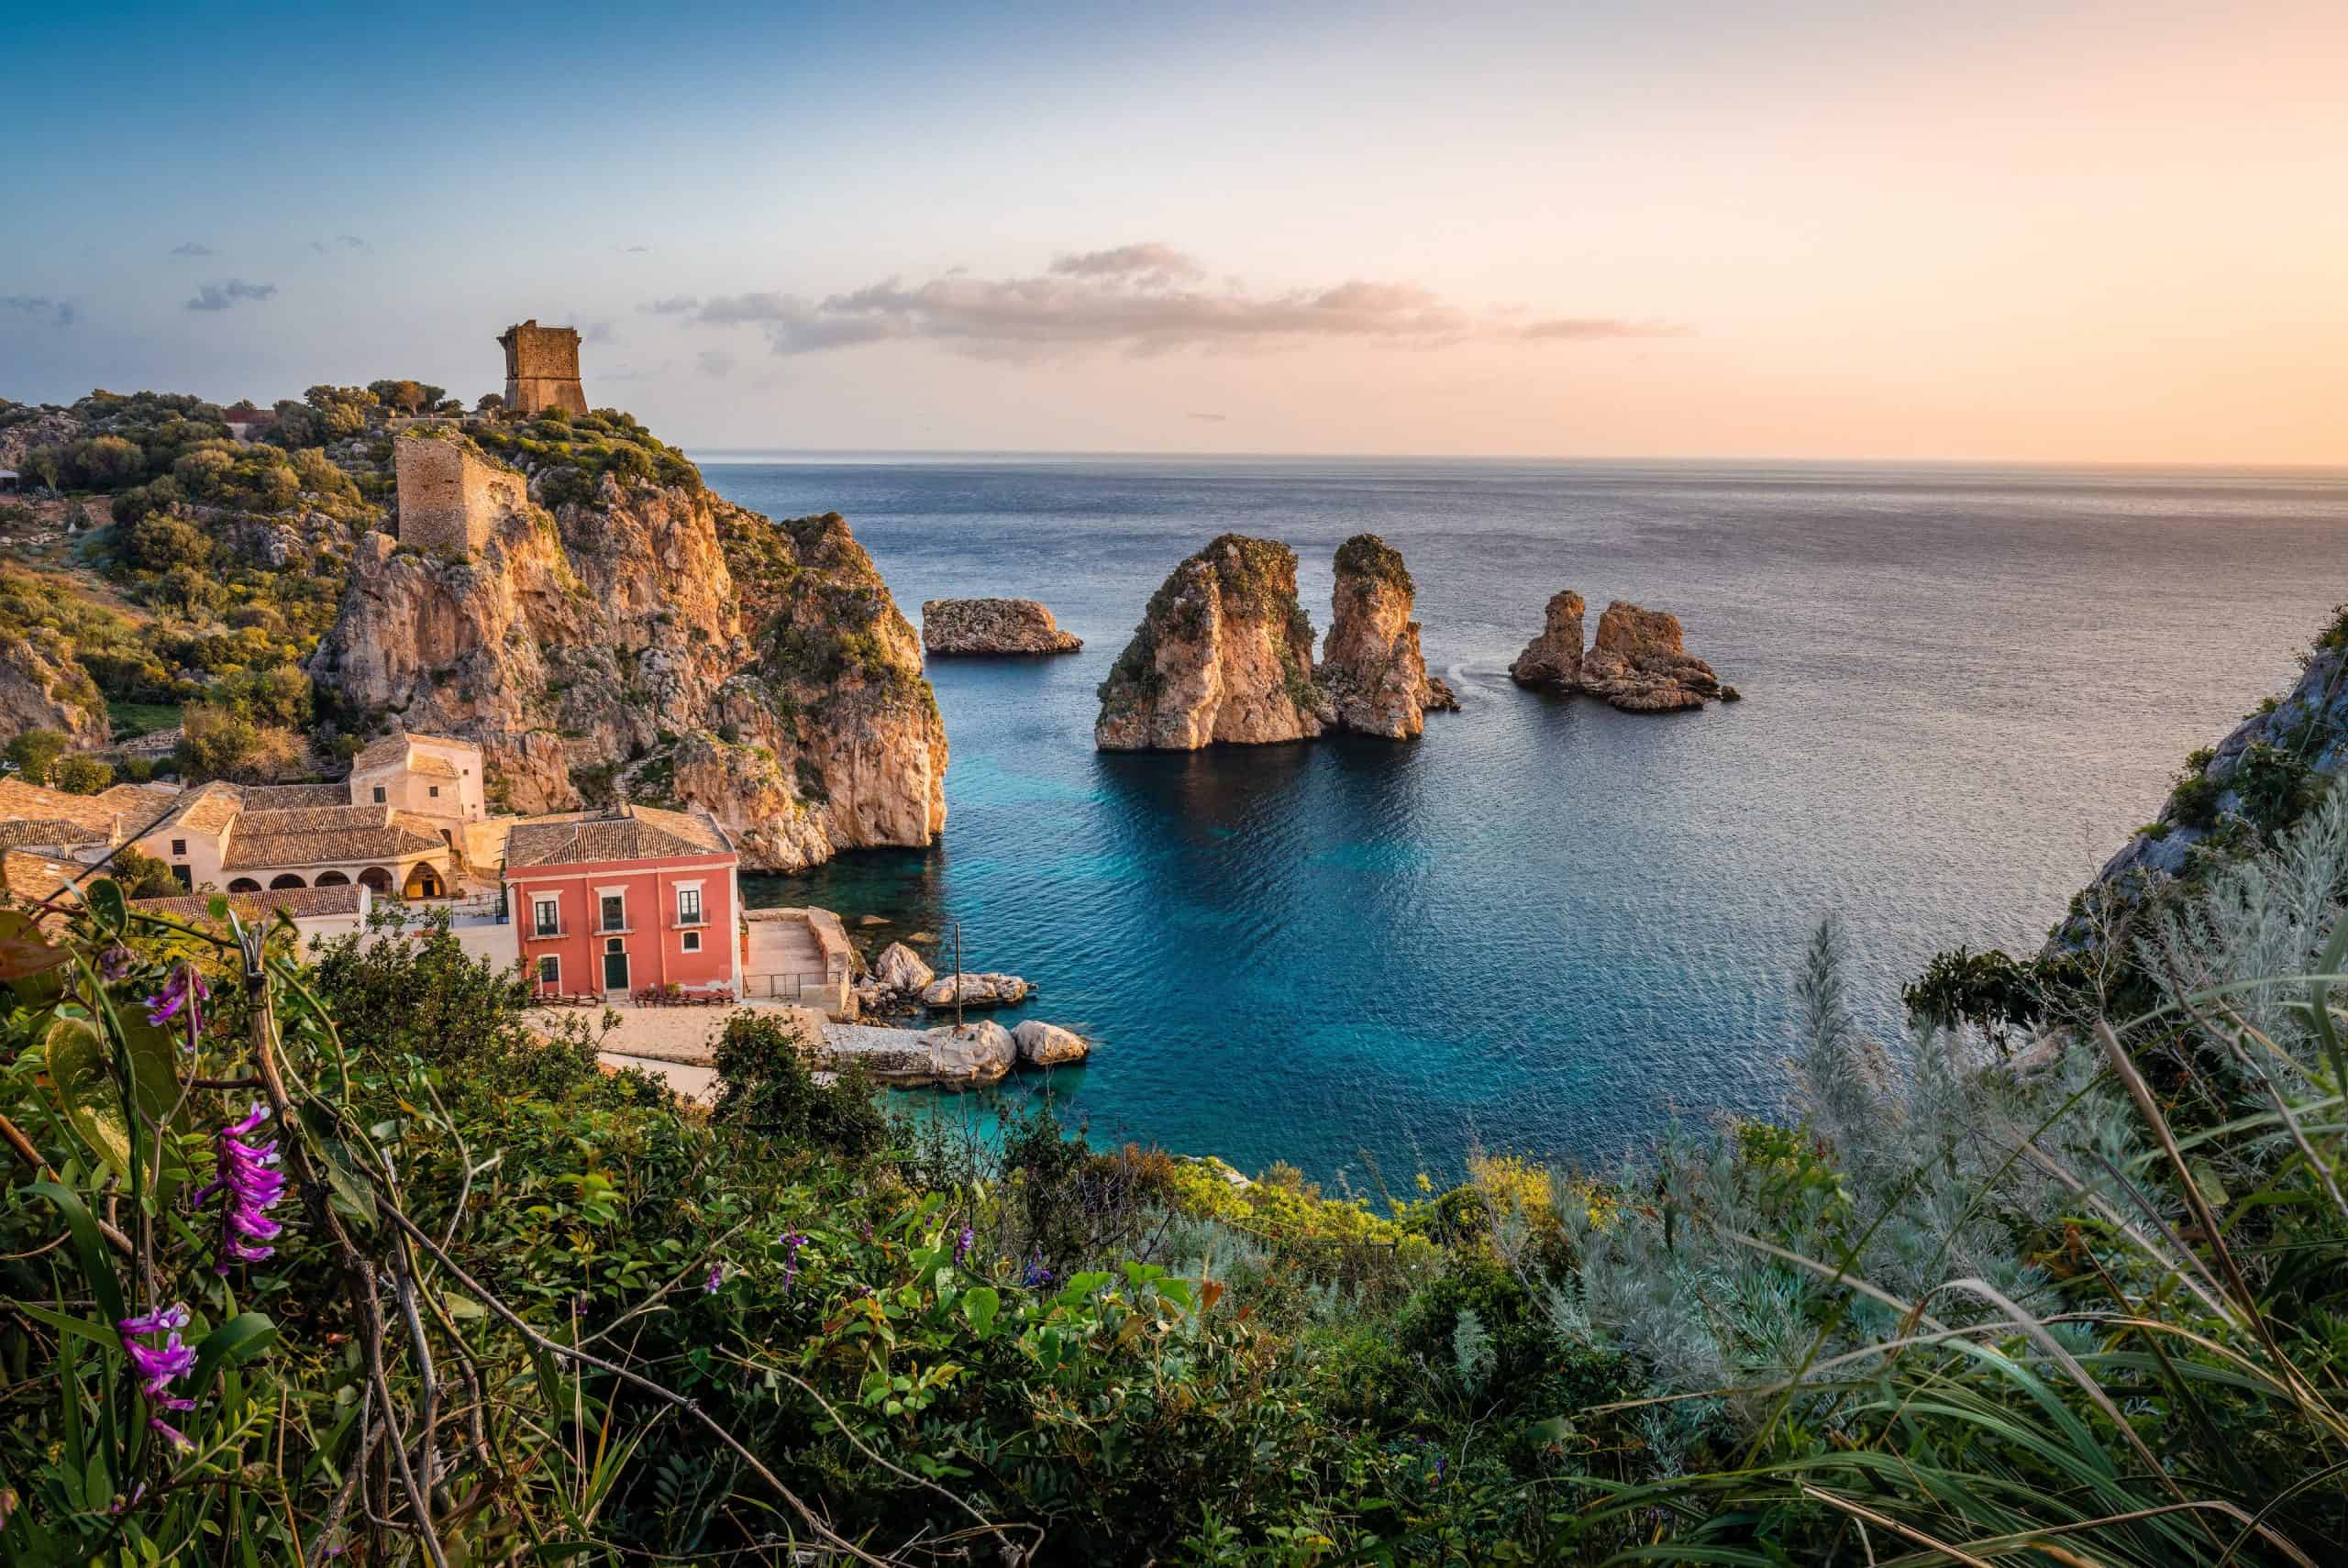 An American in Italy: The Most Exclusive Luxury Destinations